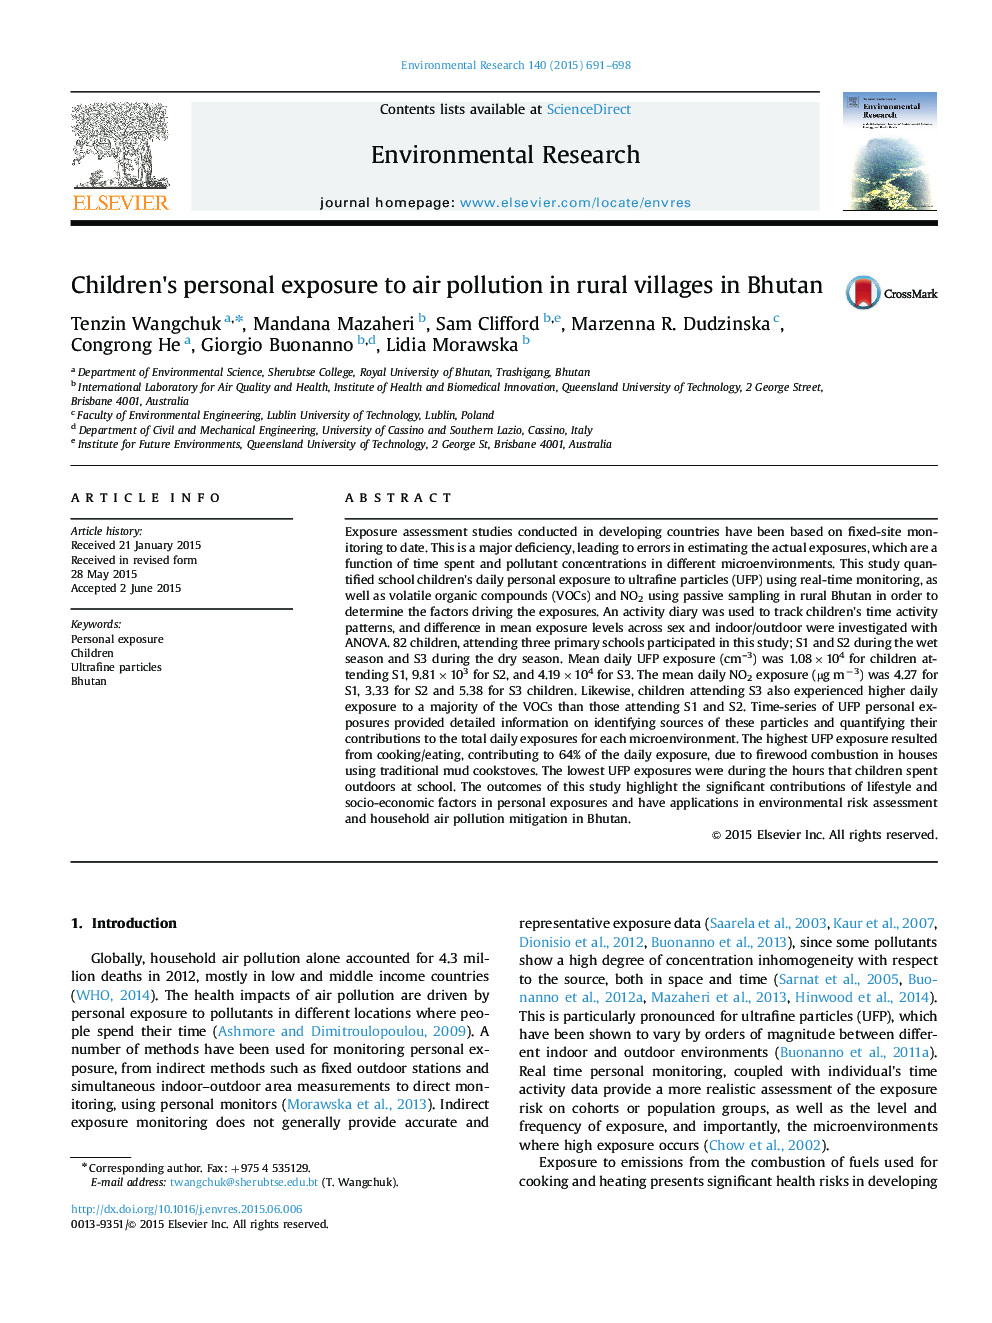 Children's personal exposure to air pollution in rural villages in Bhutan